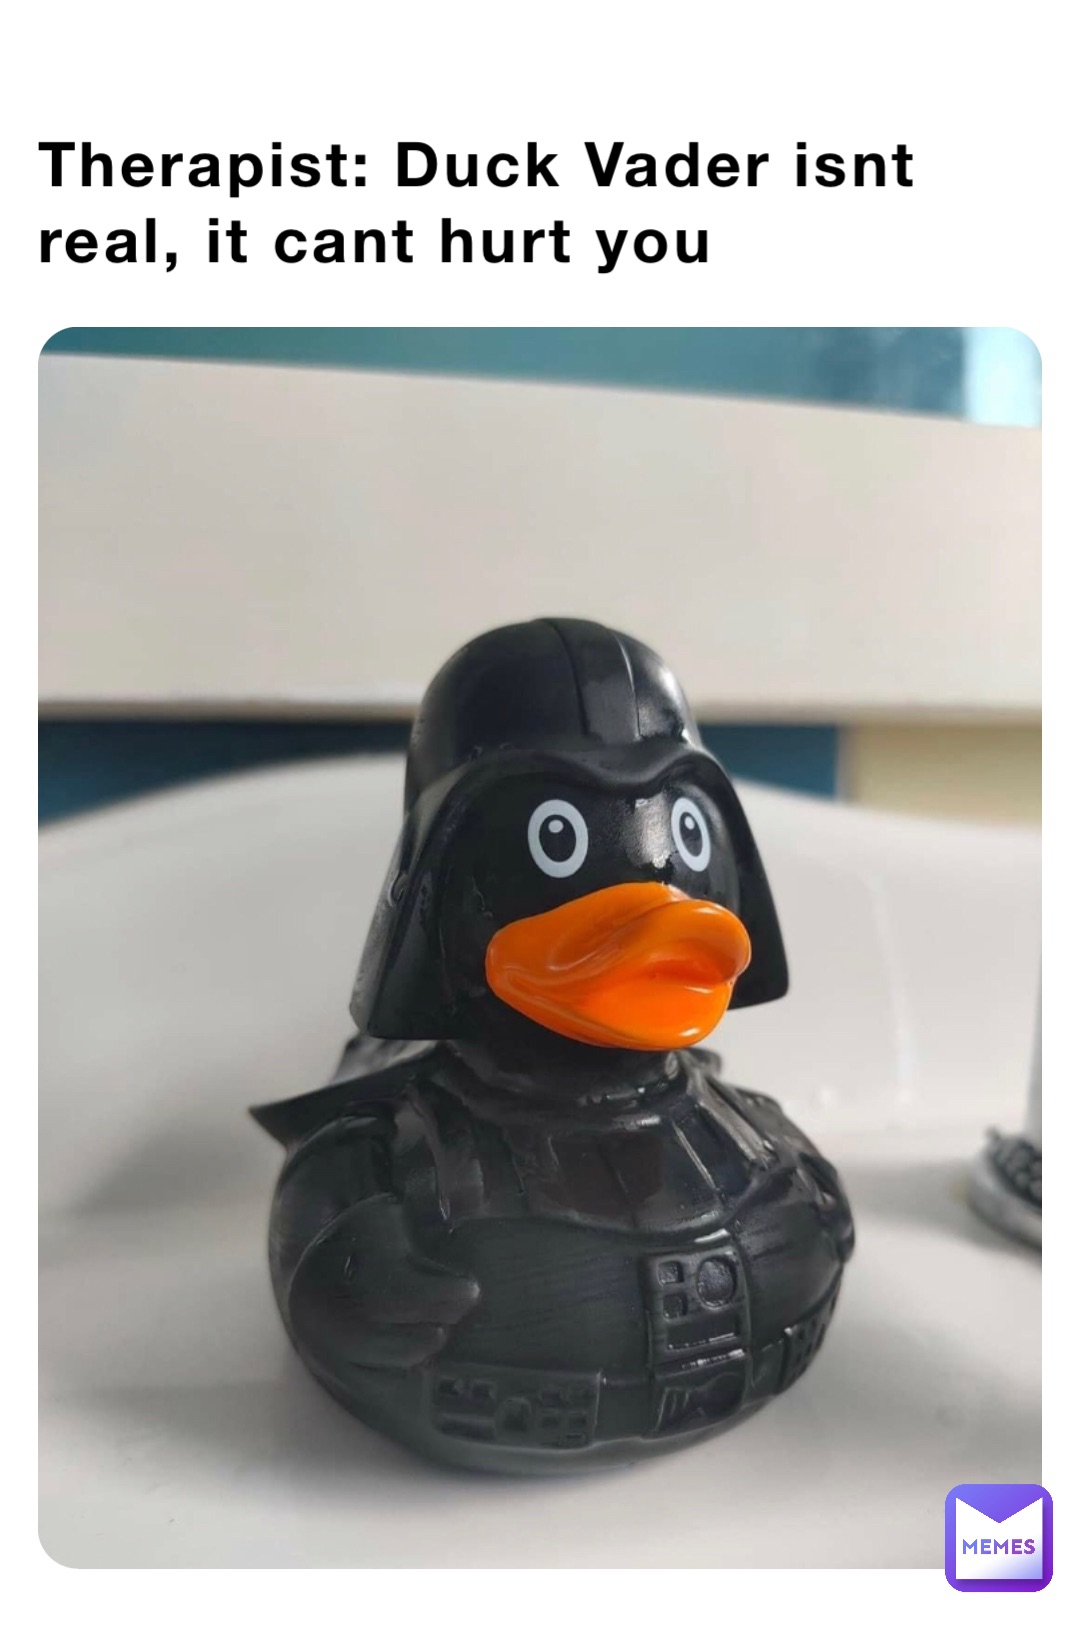 Therapist: Duck Vader isnt real, it cant hurt you